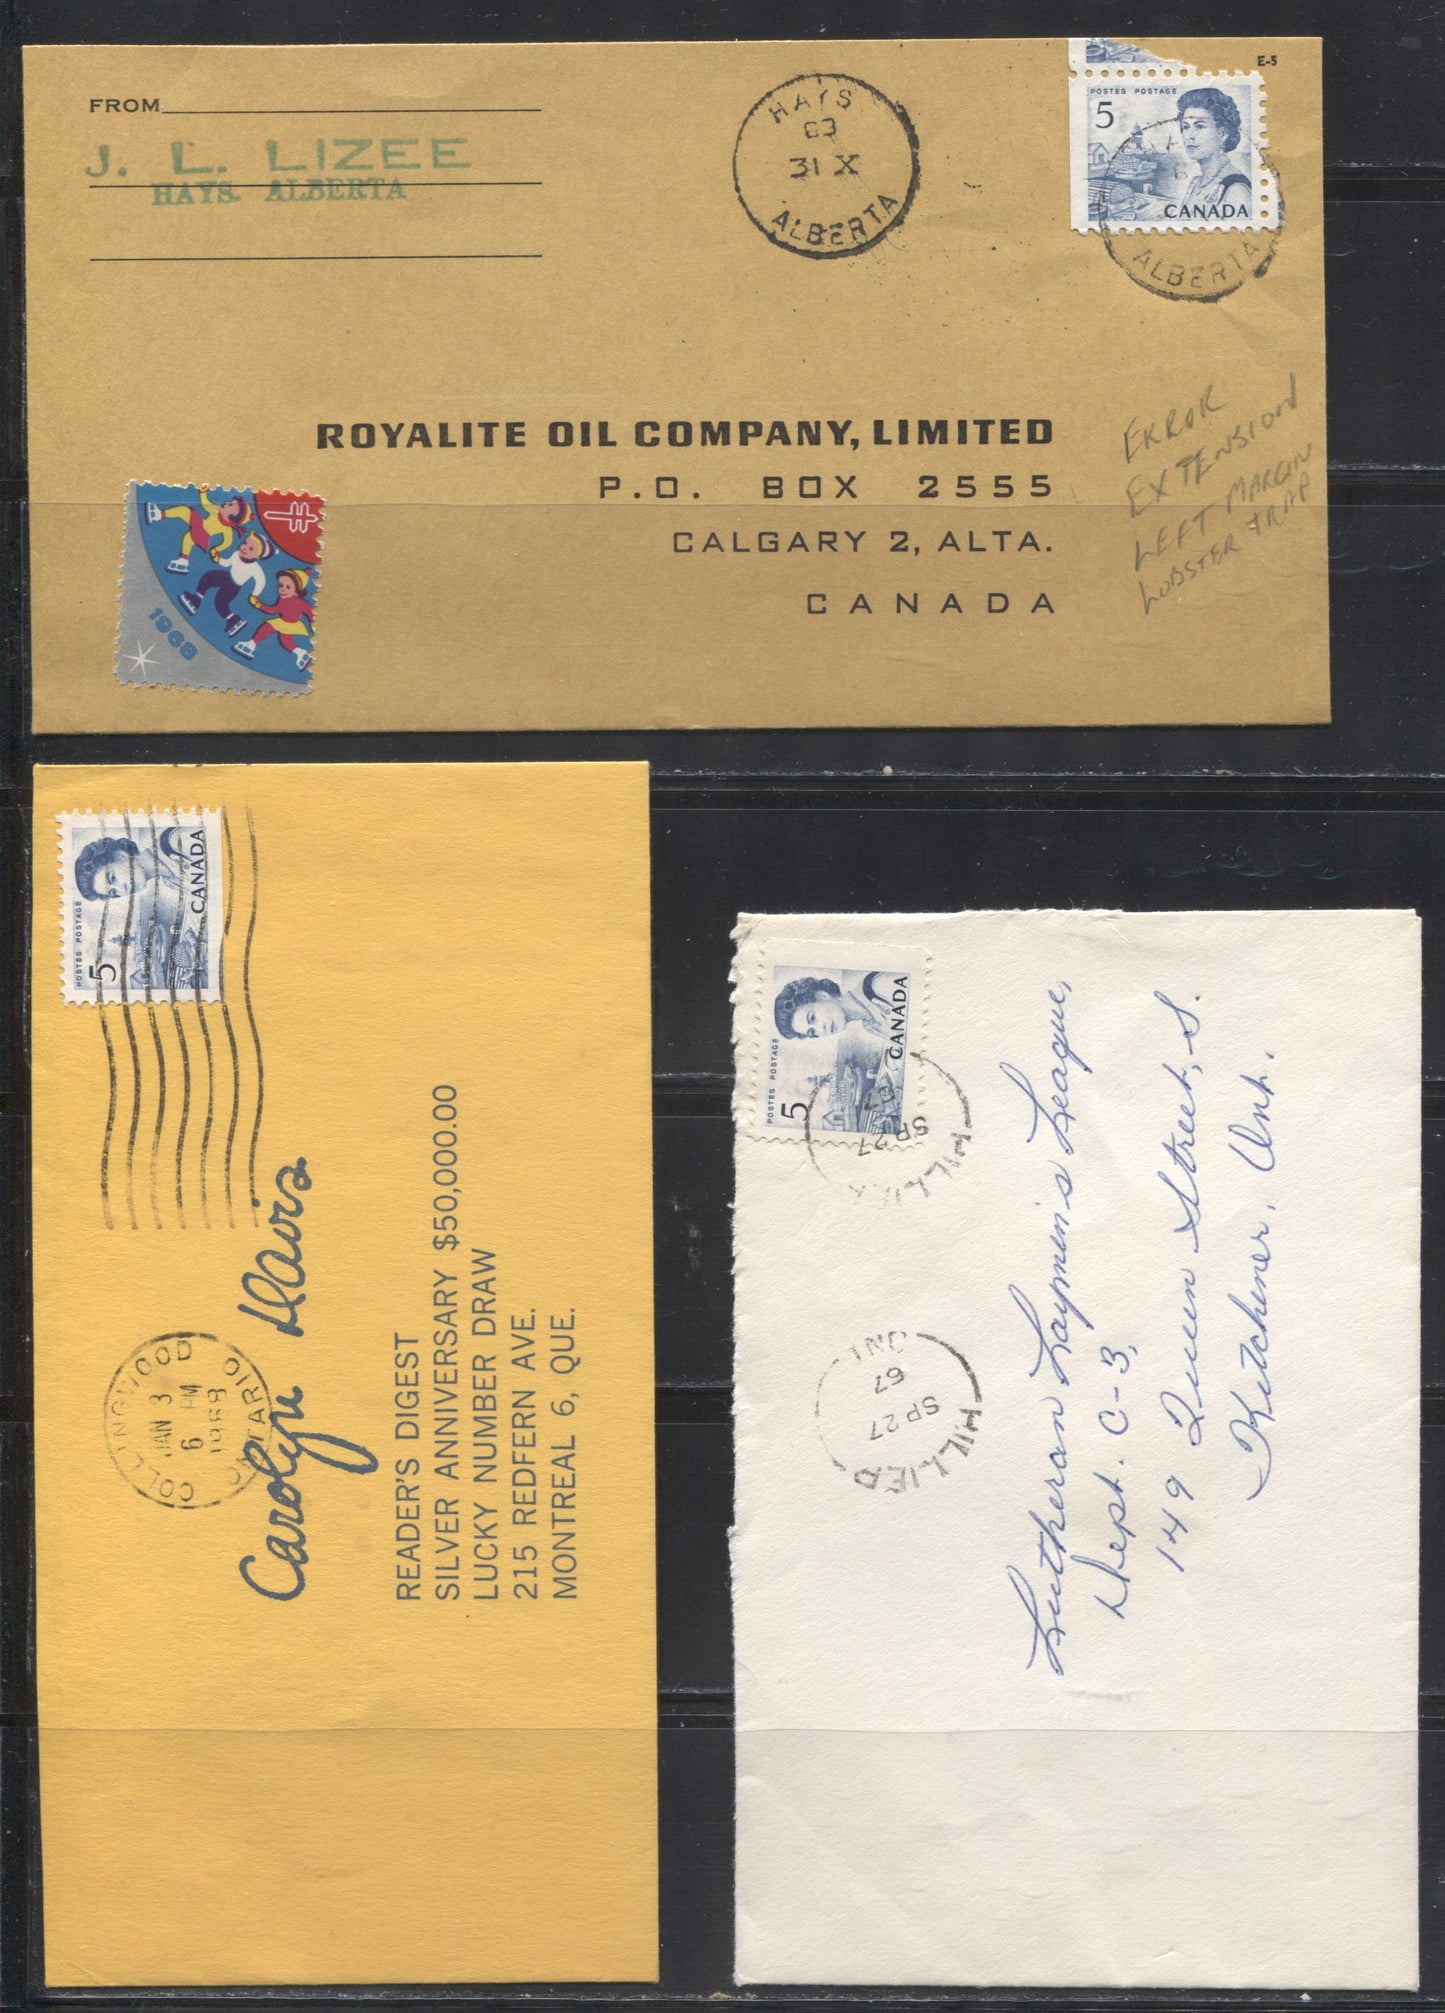 Lot 267 Canada #458as, 458bs, 458di 5c Deep Blue Atlantic Fishing Village, 1967-1973 Centennial Issue, Usages of The Perf. 10 and 12 Booklet Stamps and the Miniature Pane Stamp on Domestic Covers